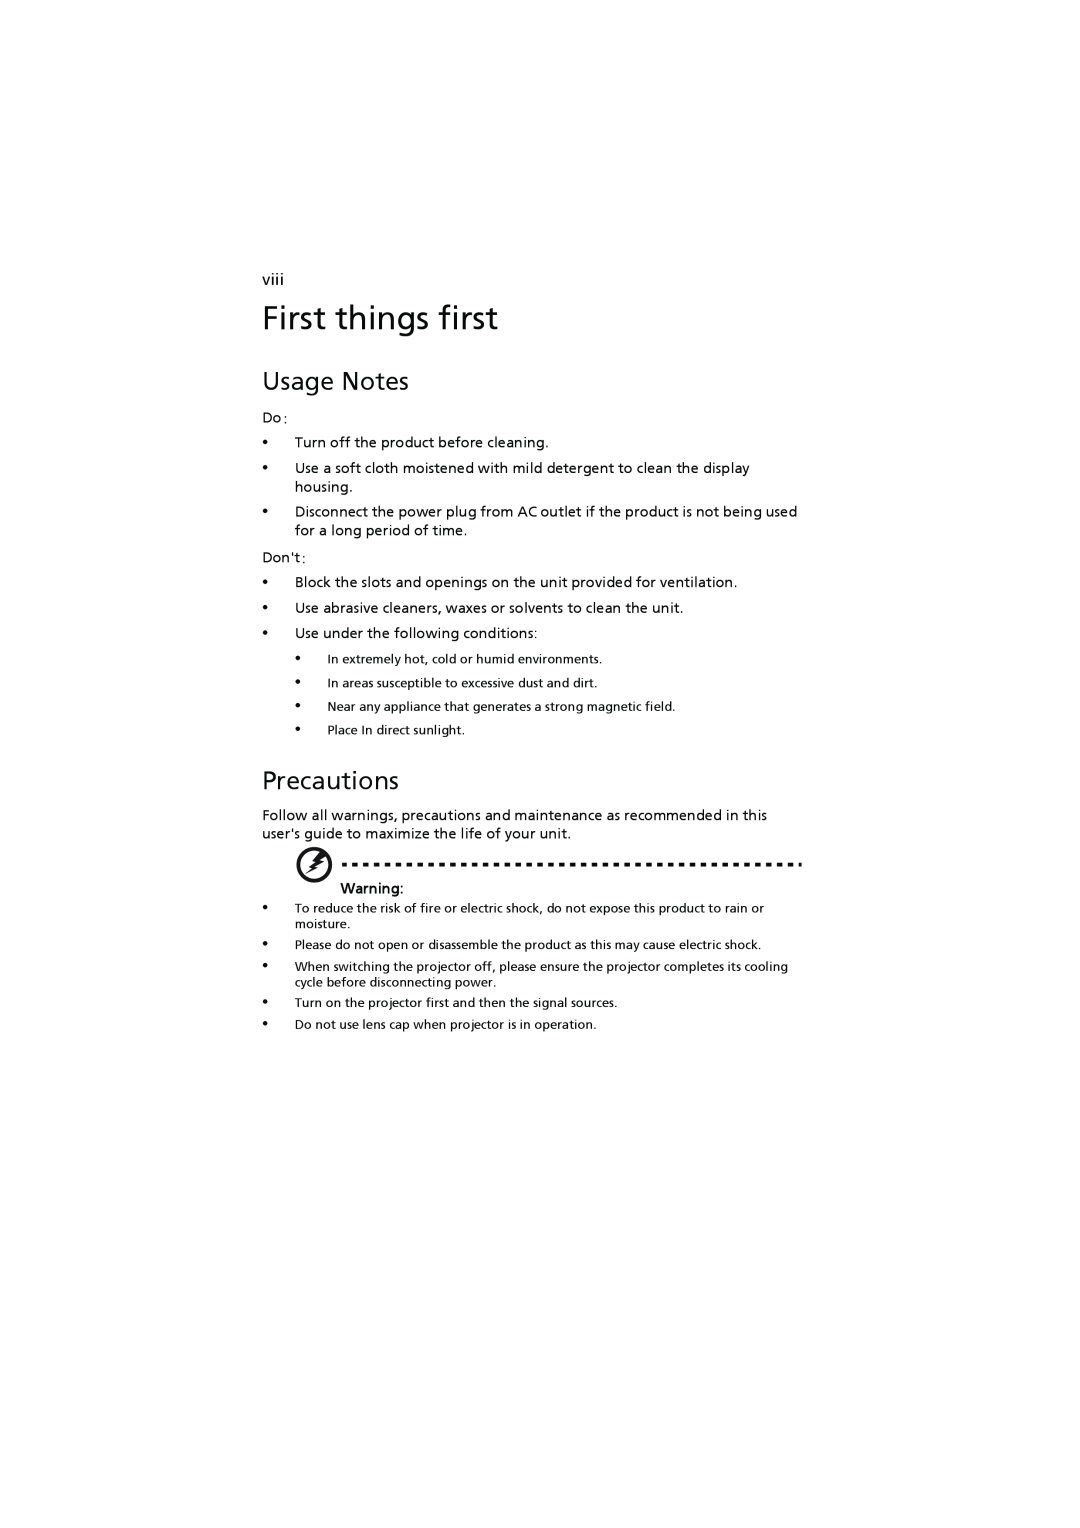 Acer K11 manual First things first, Usage Notes, Precautions 